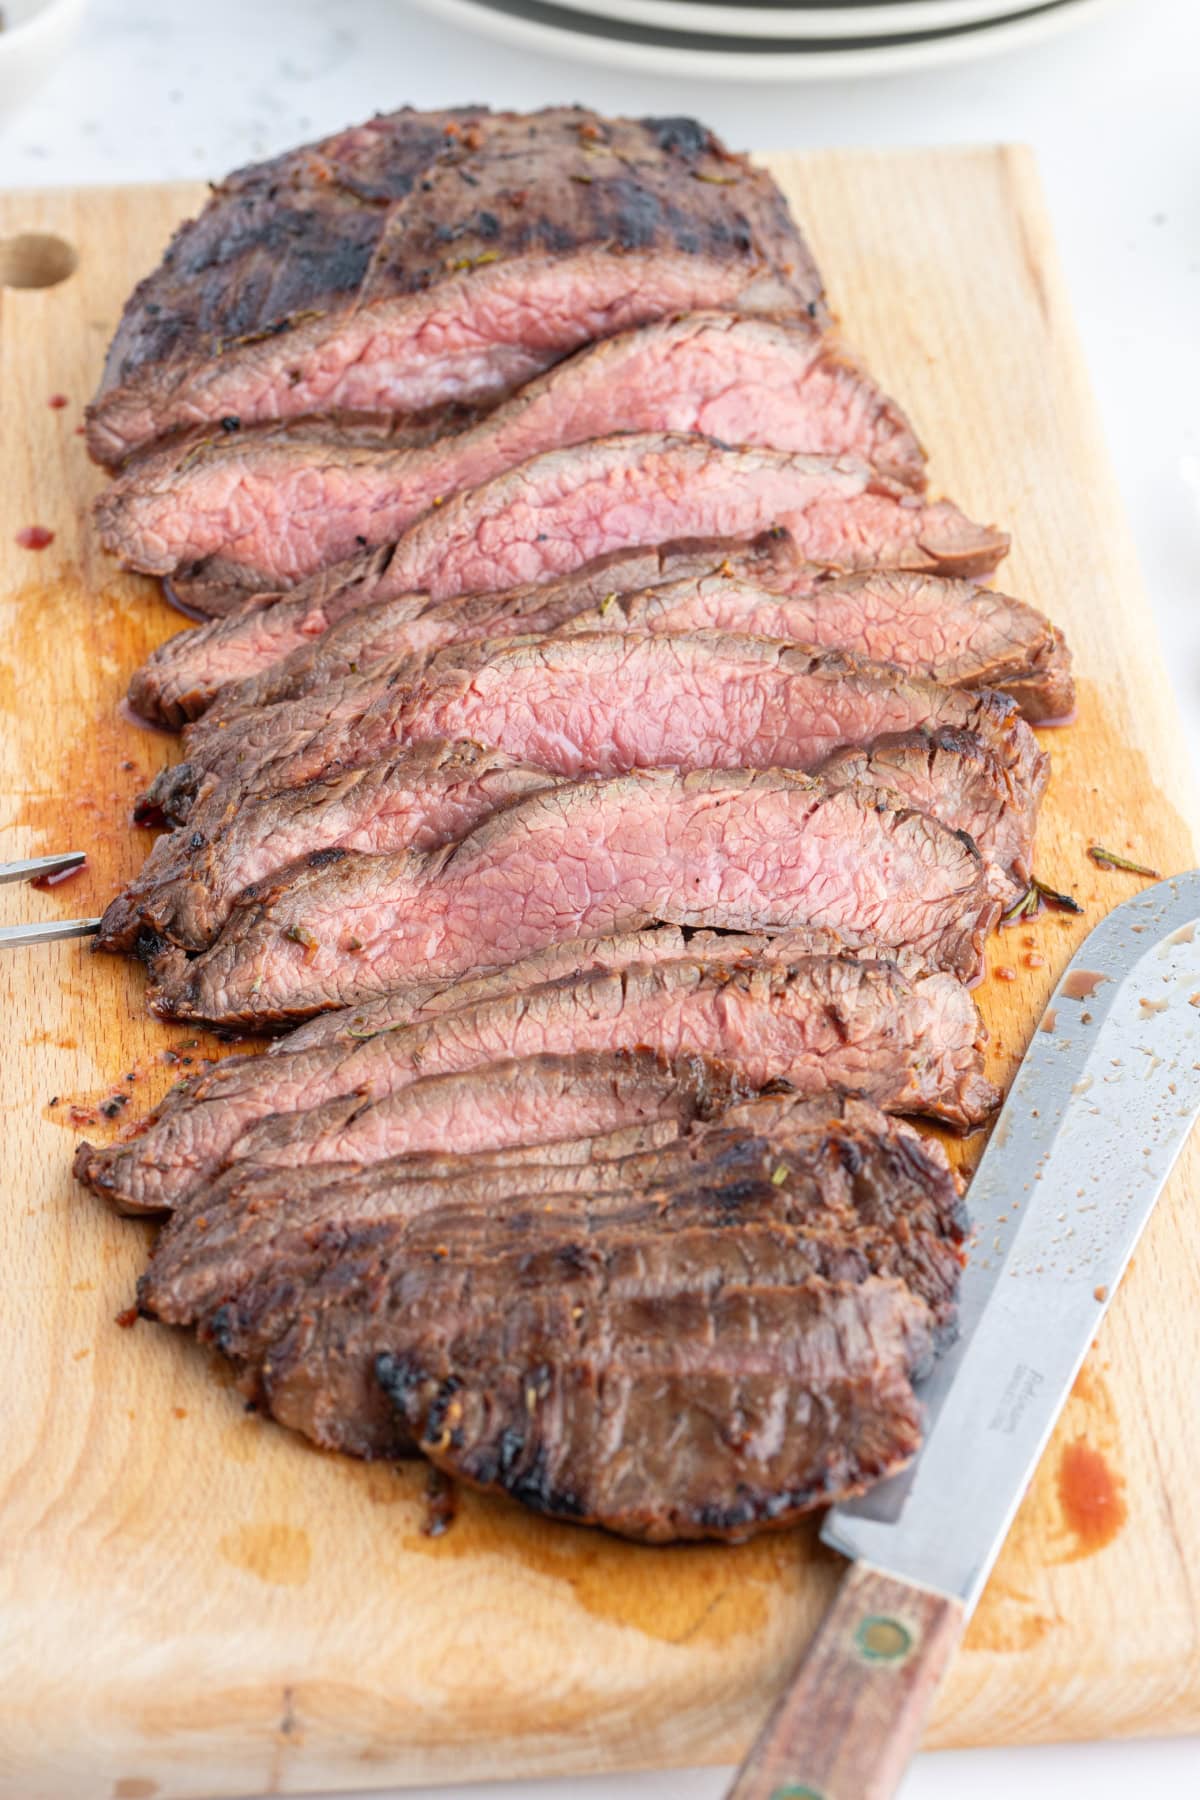 grilled flank steak with rosemary marinade sliced on board